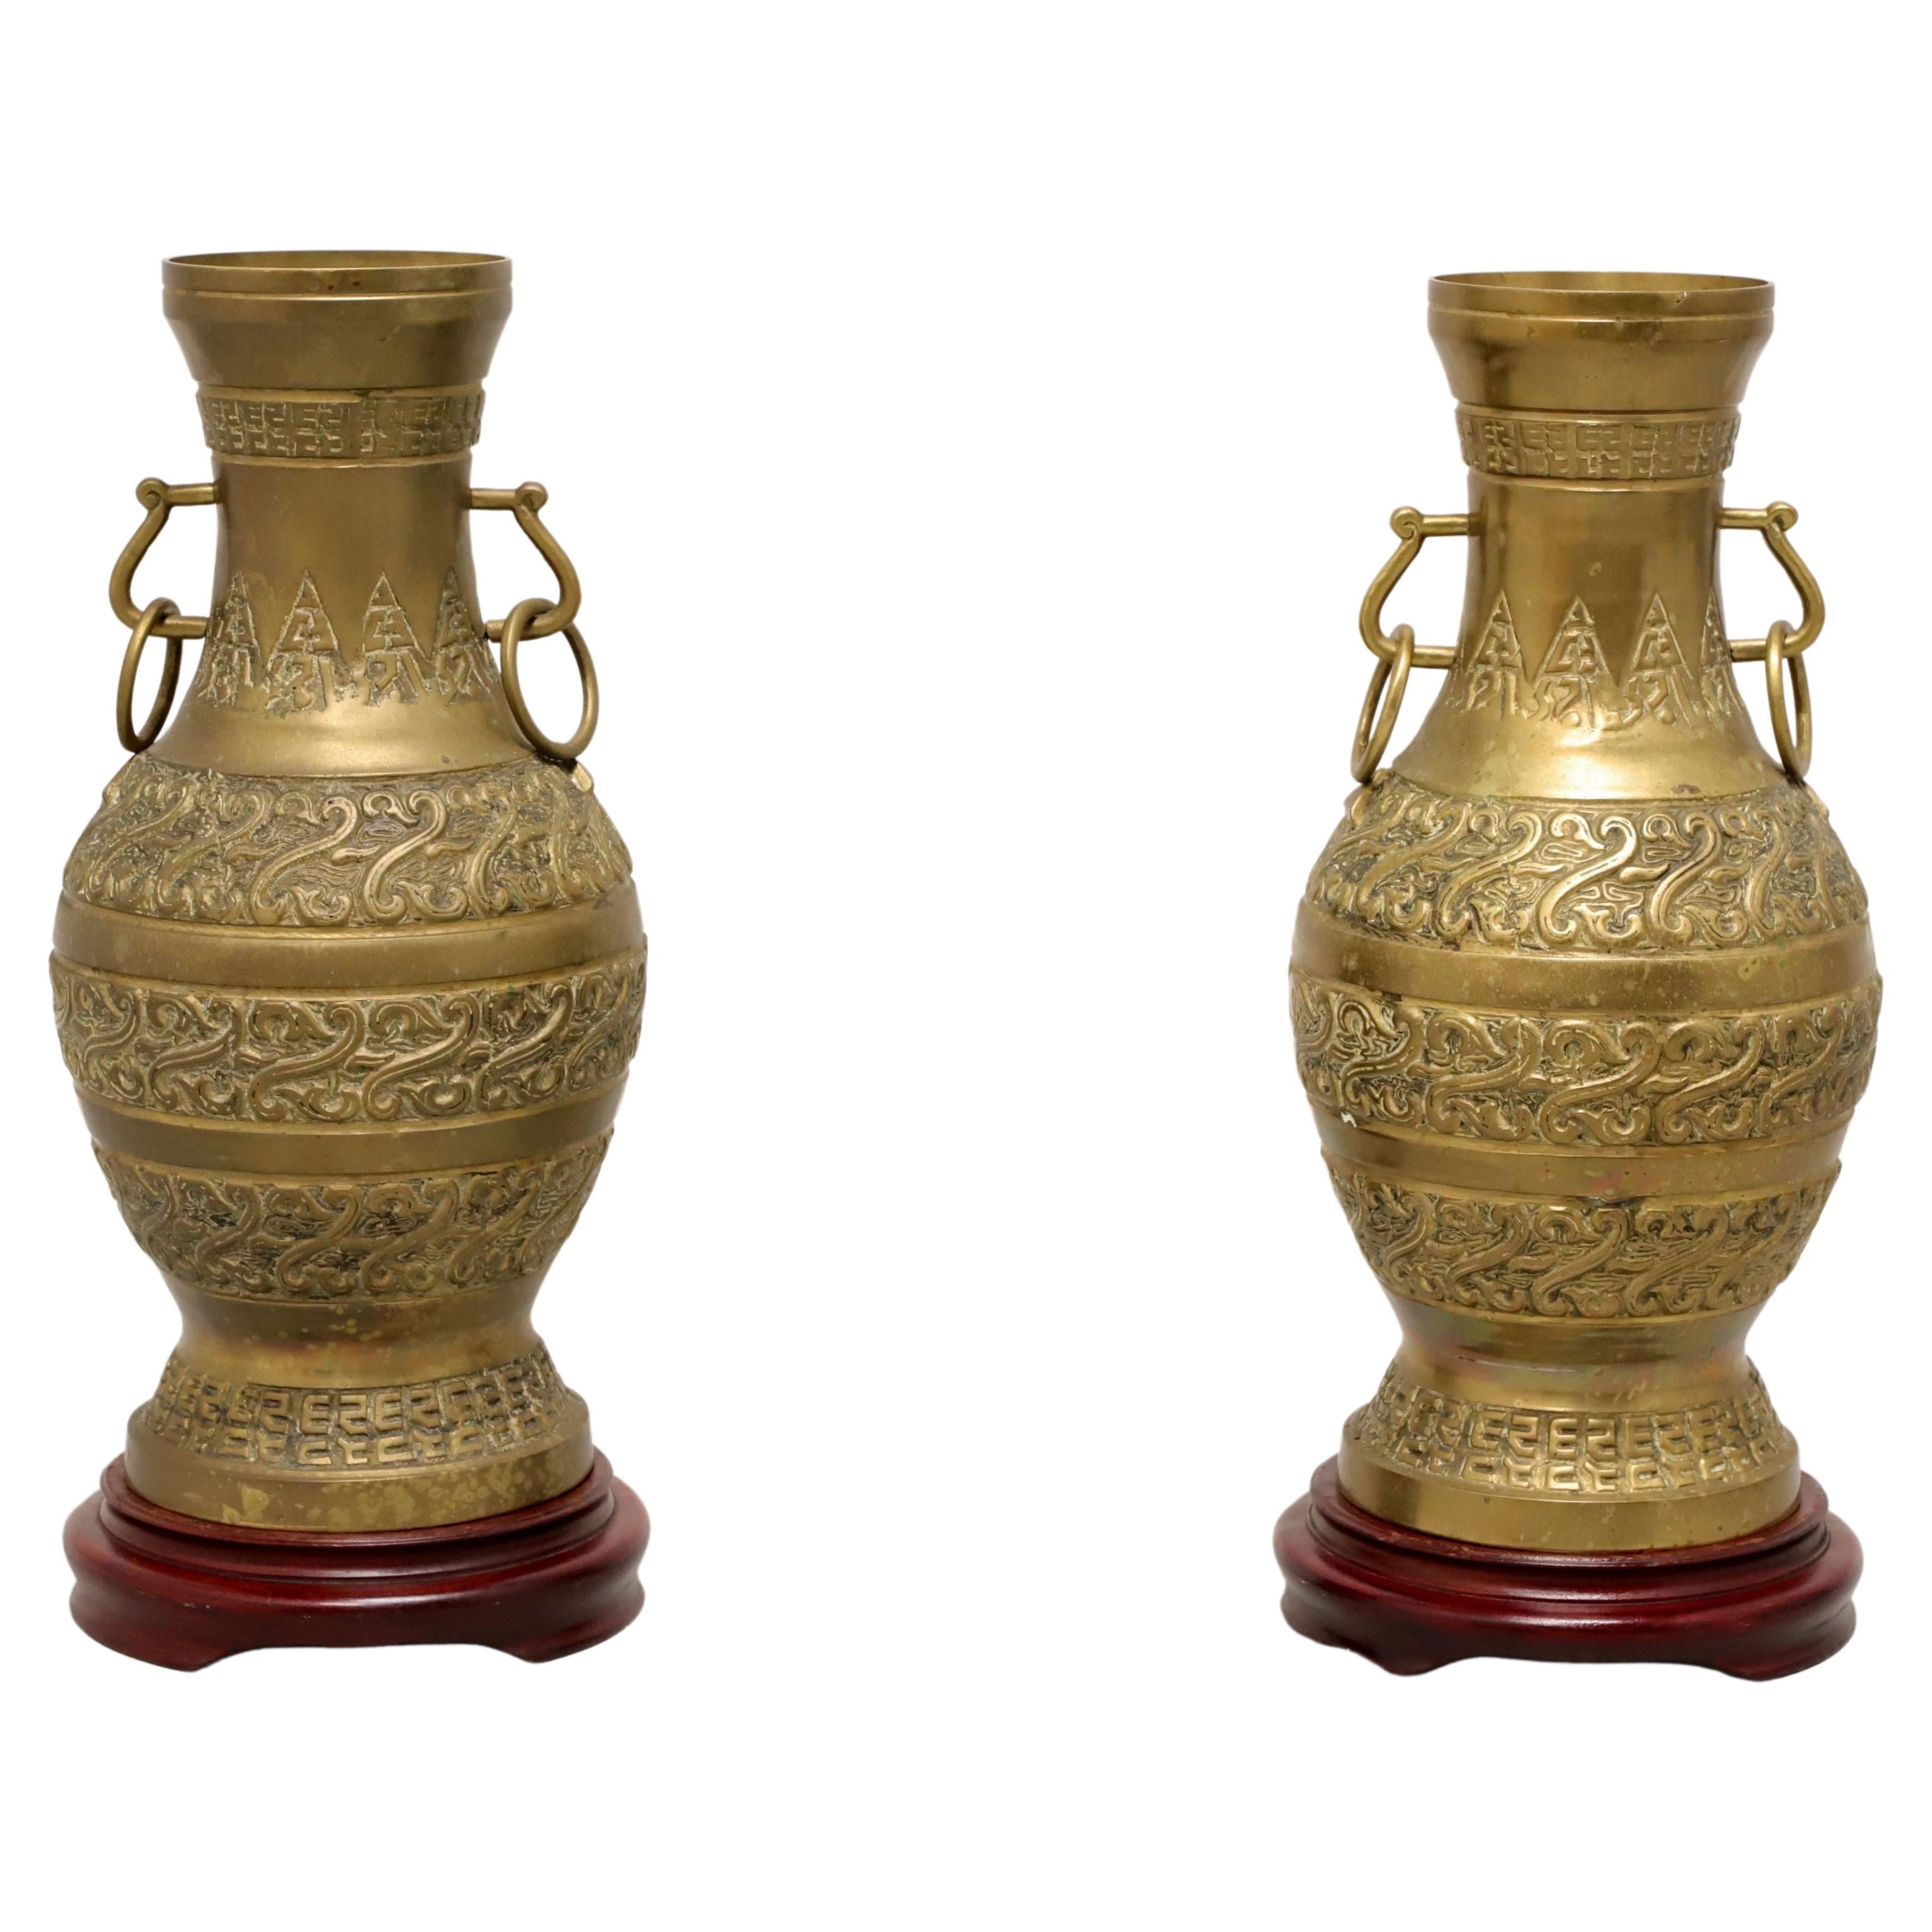 Mid 20th Century Solid Brass Decorative Urns - Pair For Sale